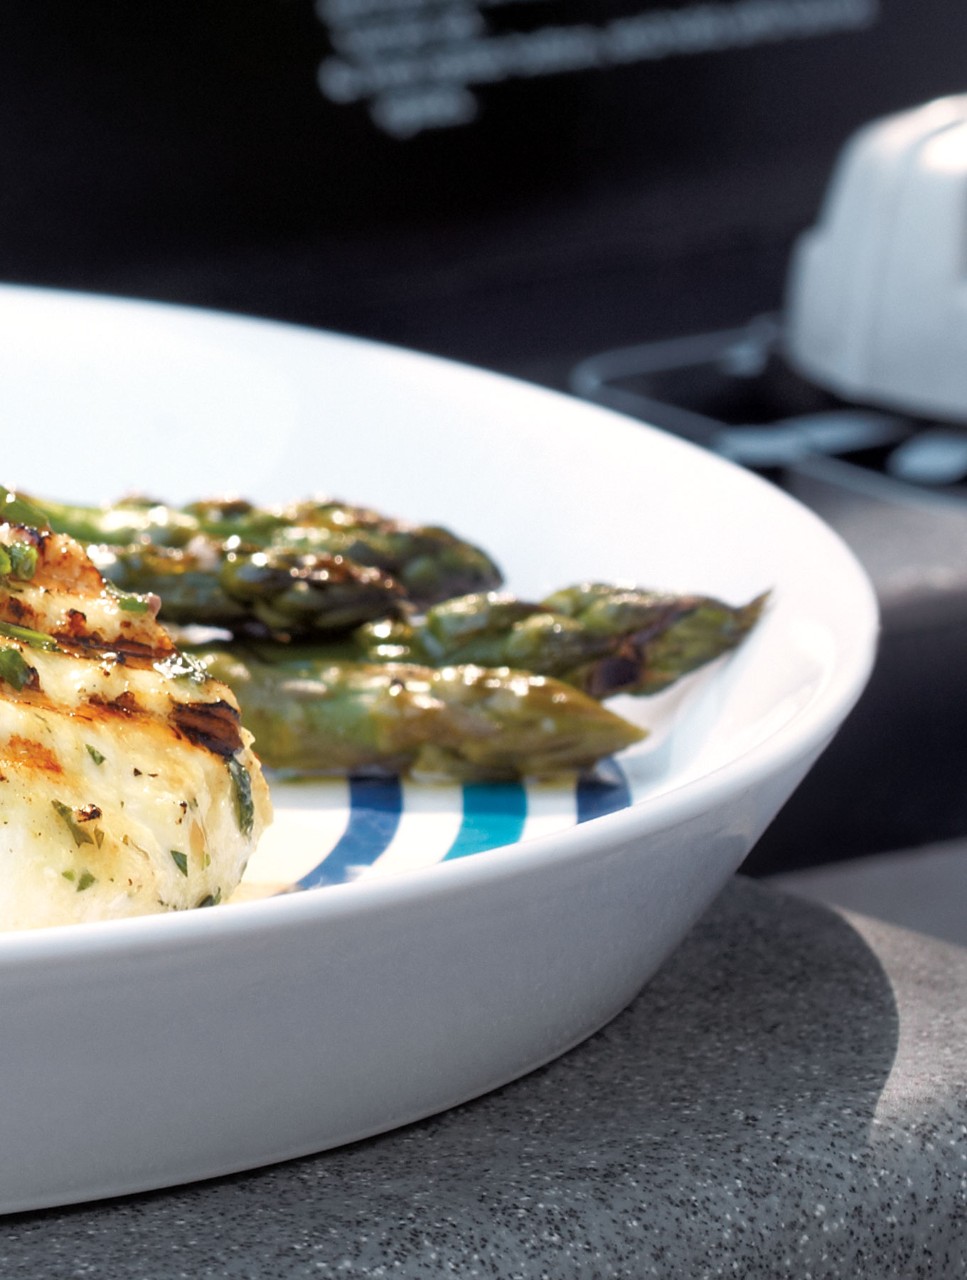 Grilled Asparagus & Vine Tomatoes with Horseradish Crème Fraîche